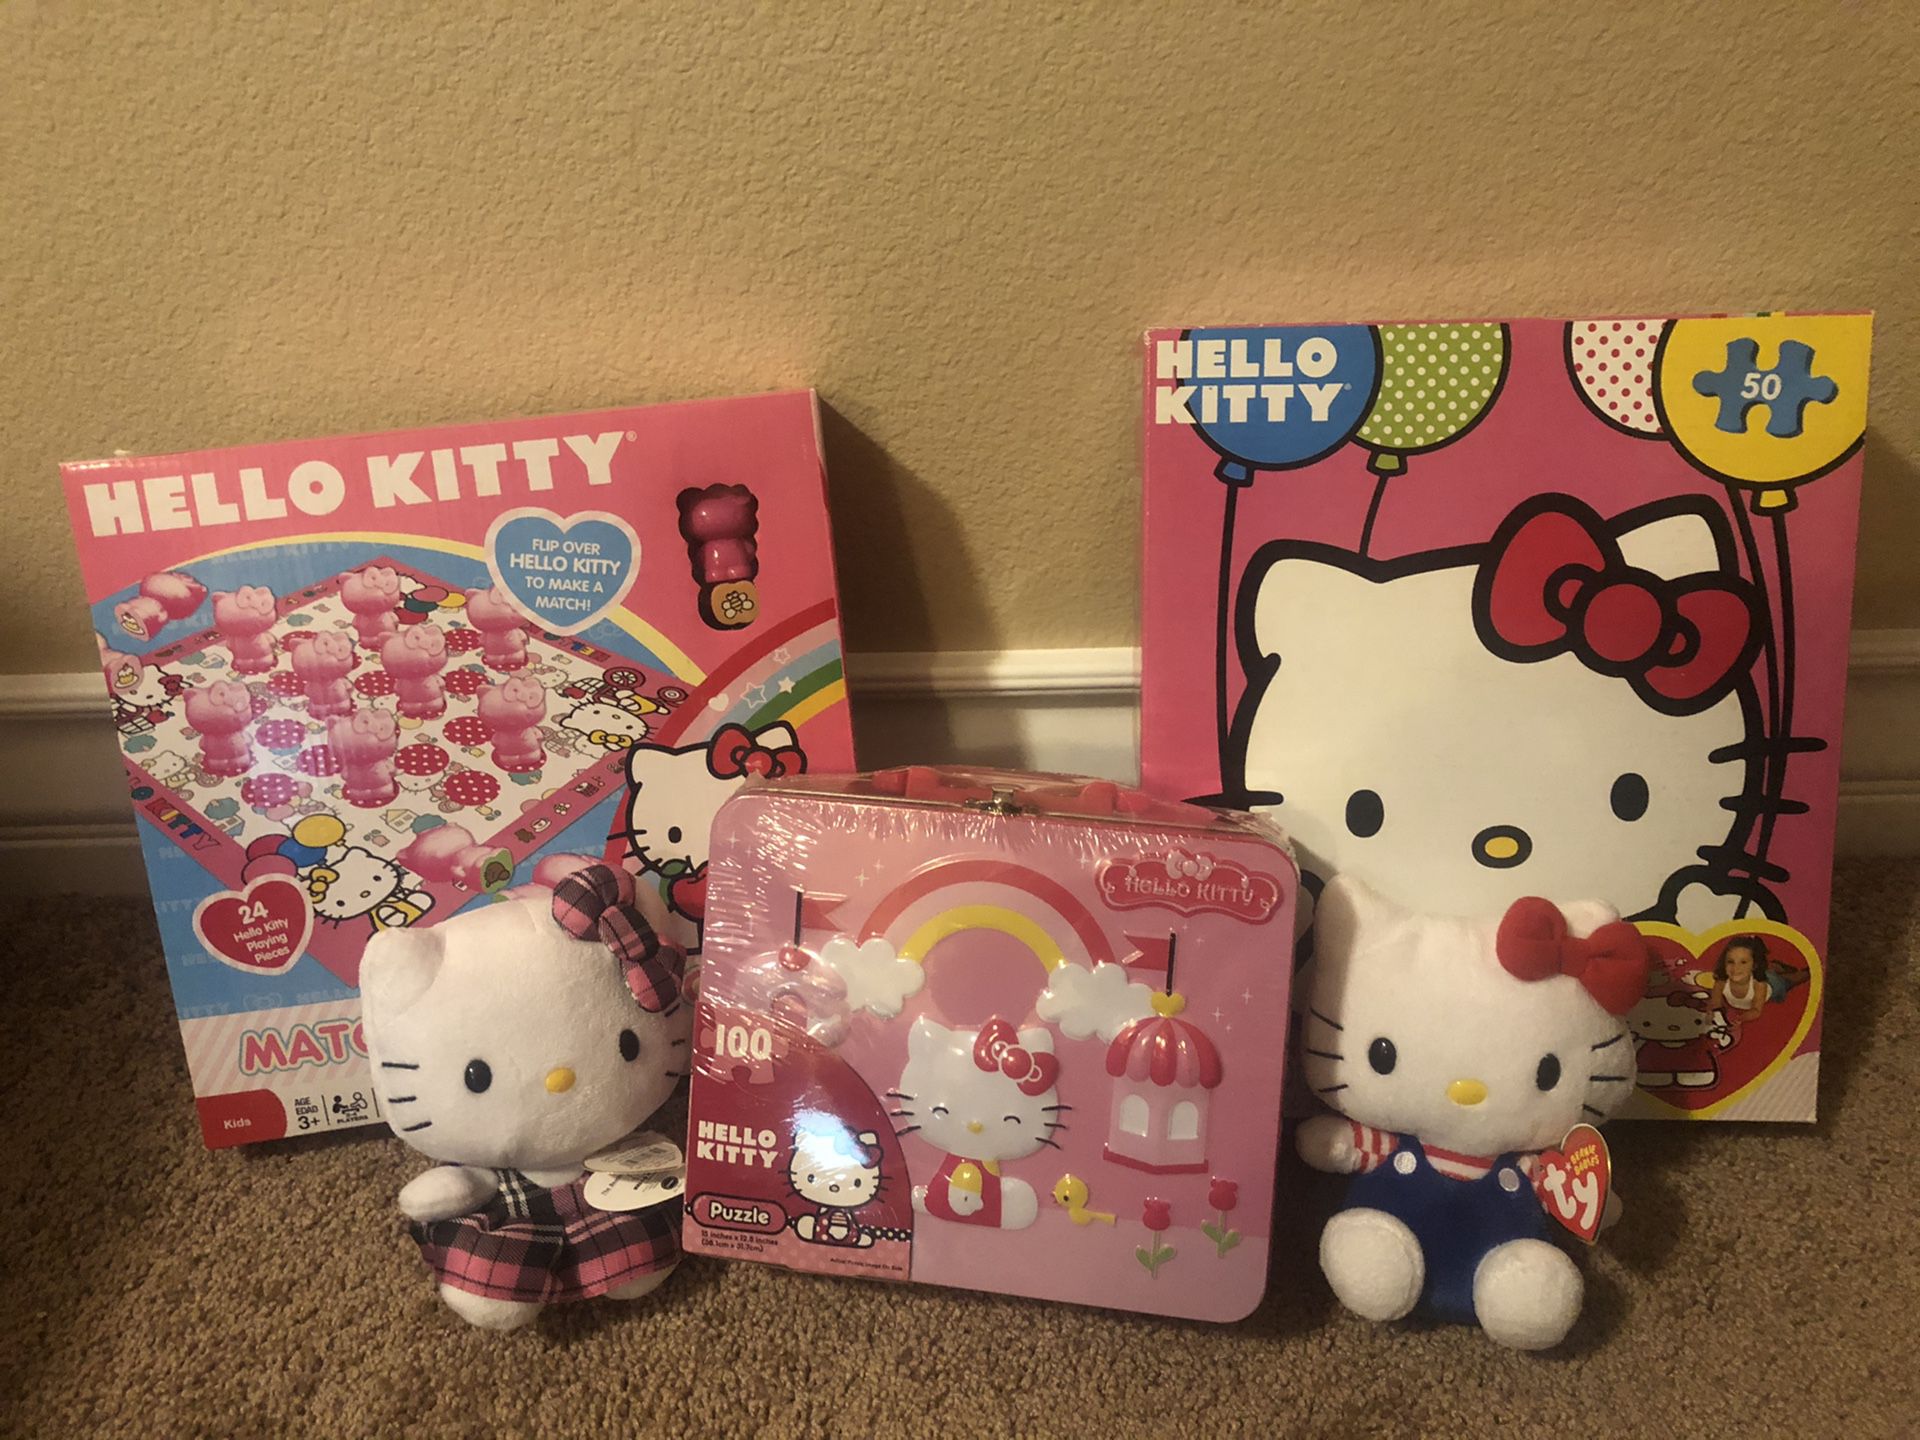 Brand New - Lot of 5 Hello Kitty Items Including Lunch Box Floor Puzzle and Plush Stuffed